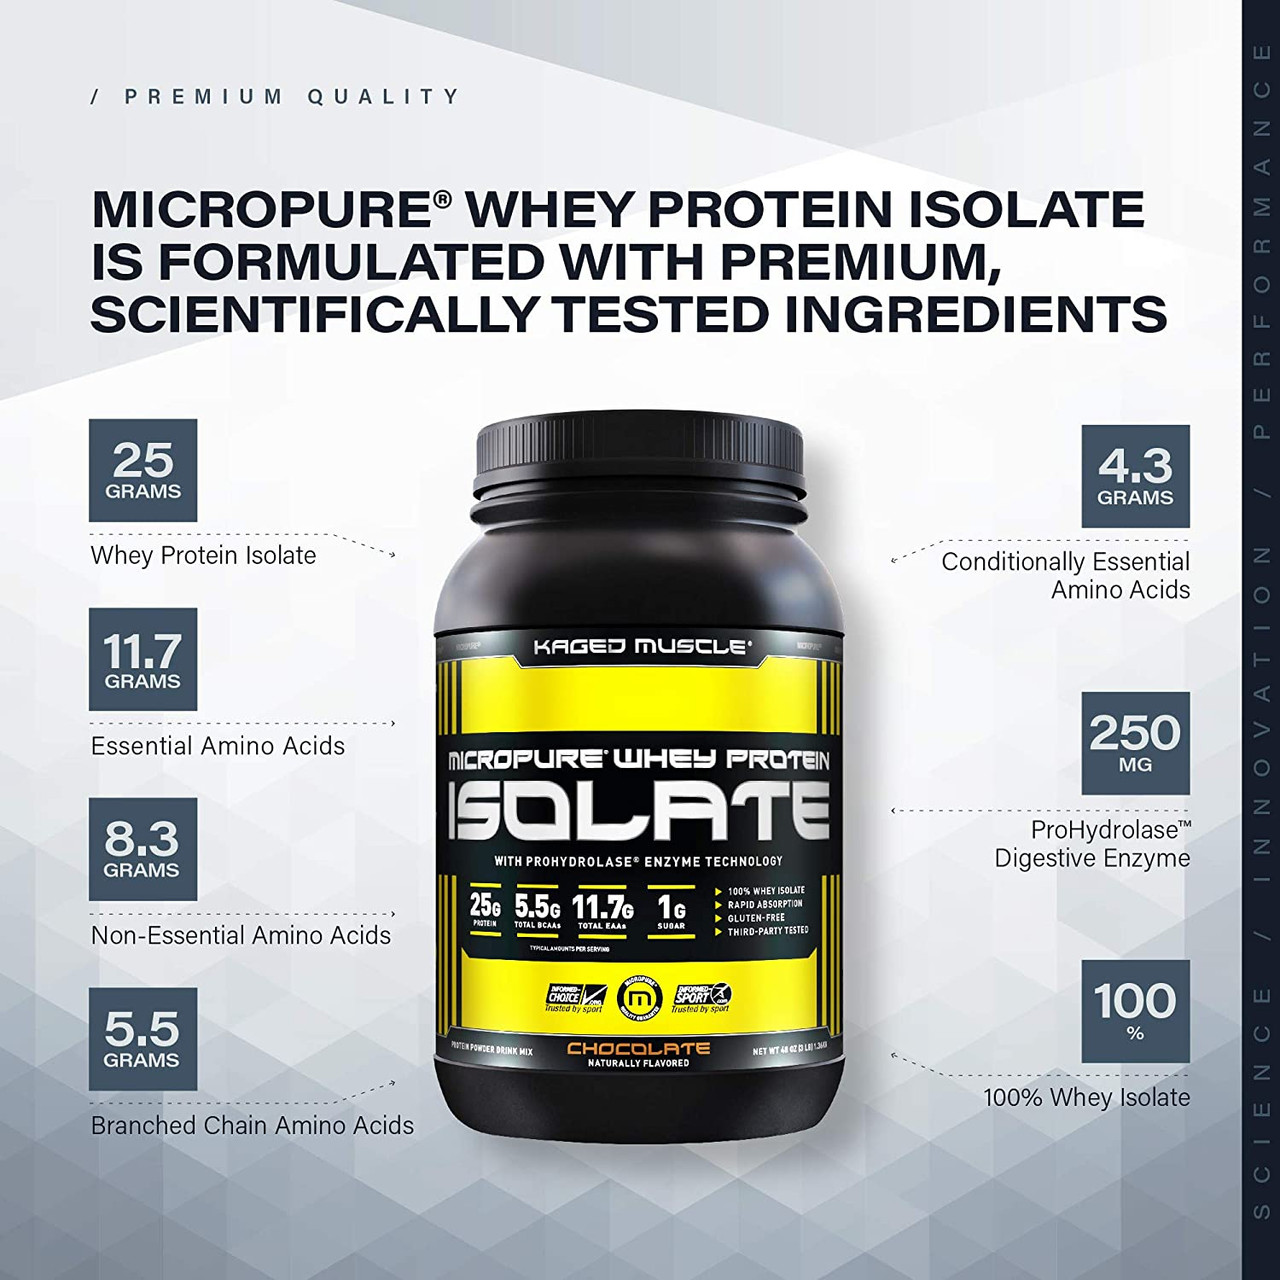 Complete Isolate 100% Grass Fed Whey Protein Isolate Powder - Zero Carbs or  Fat, Gluten Free Whey Protein Powder, Build Muscle, Improve Recovery